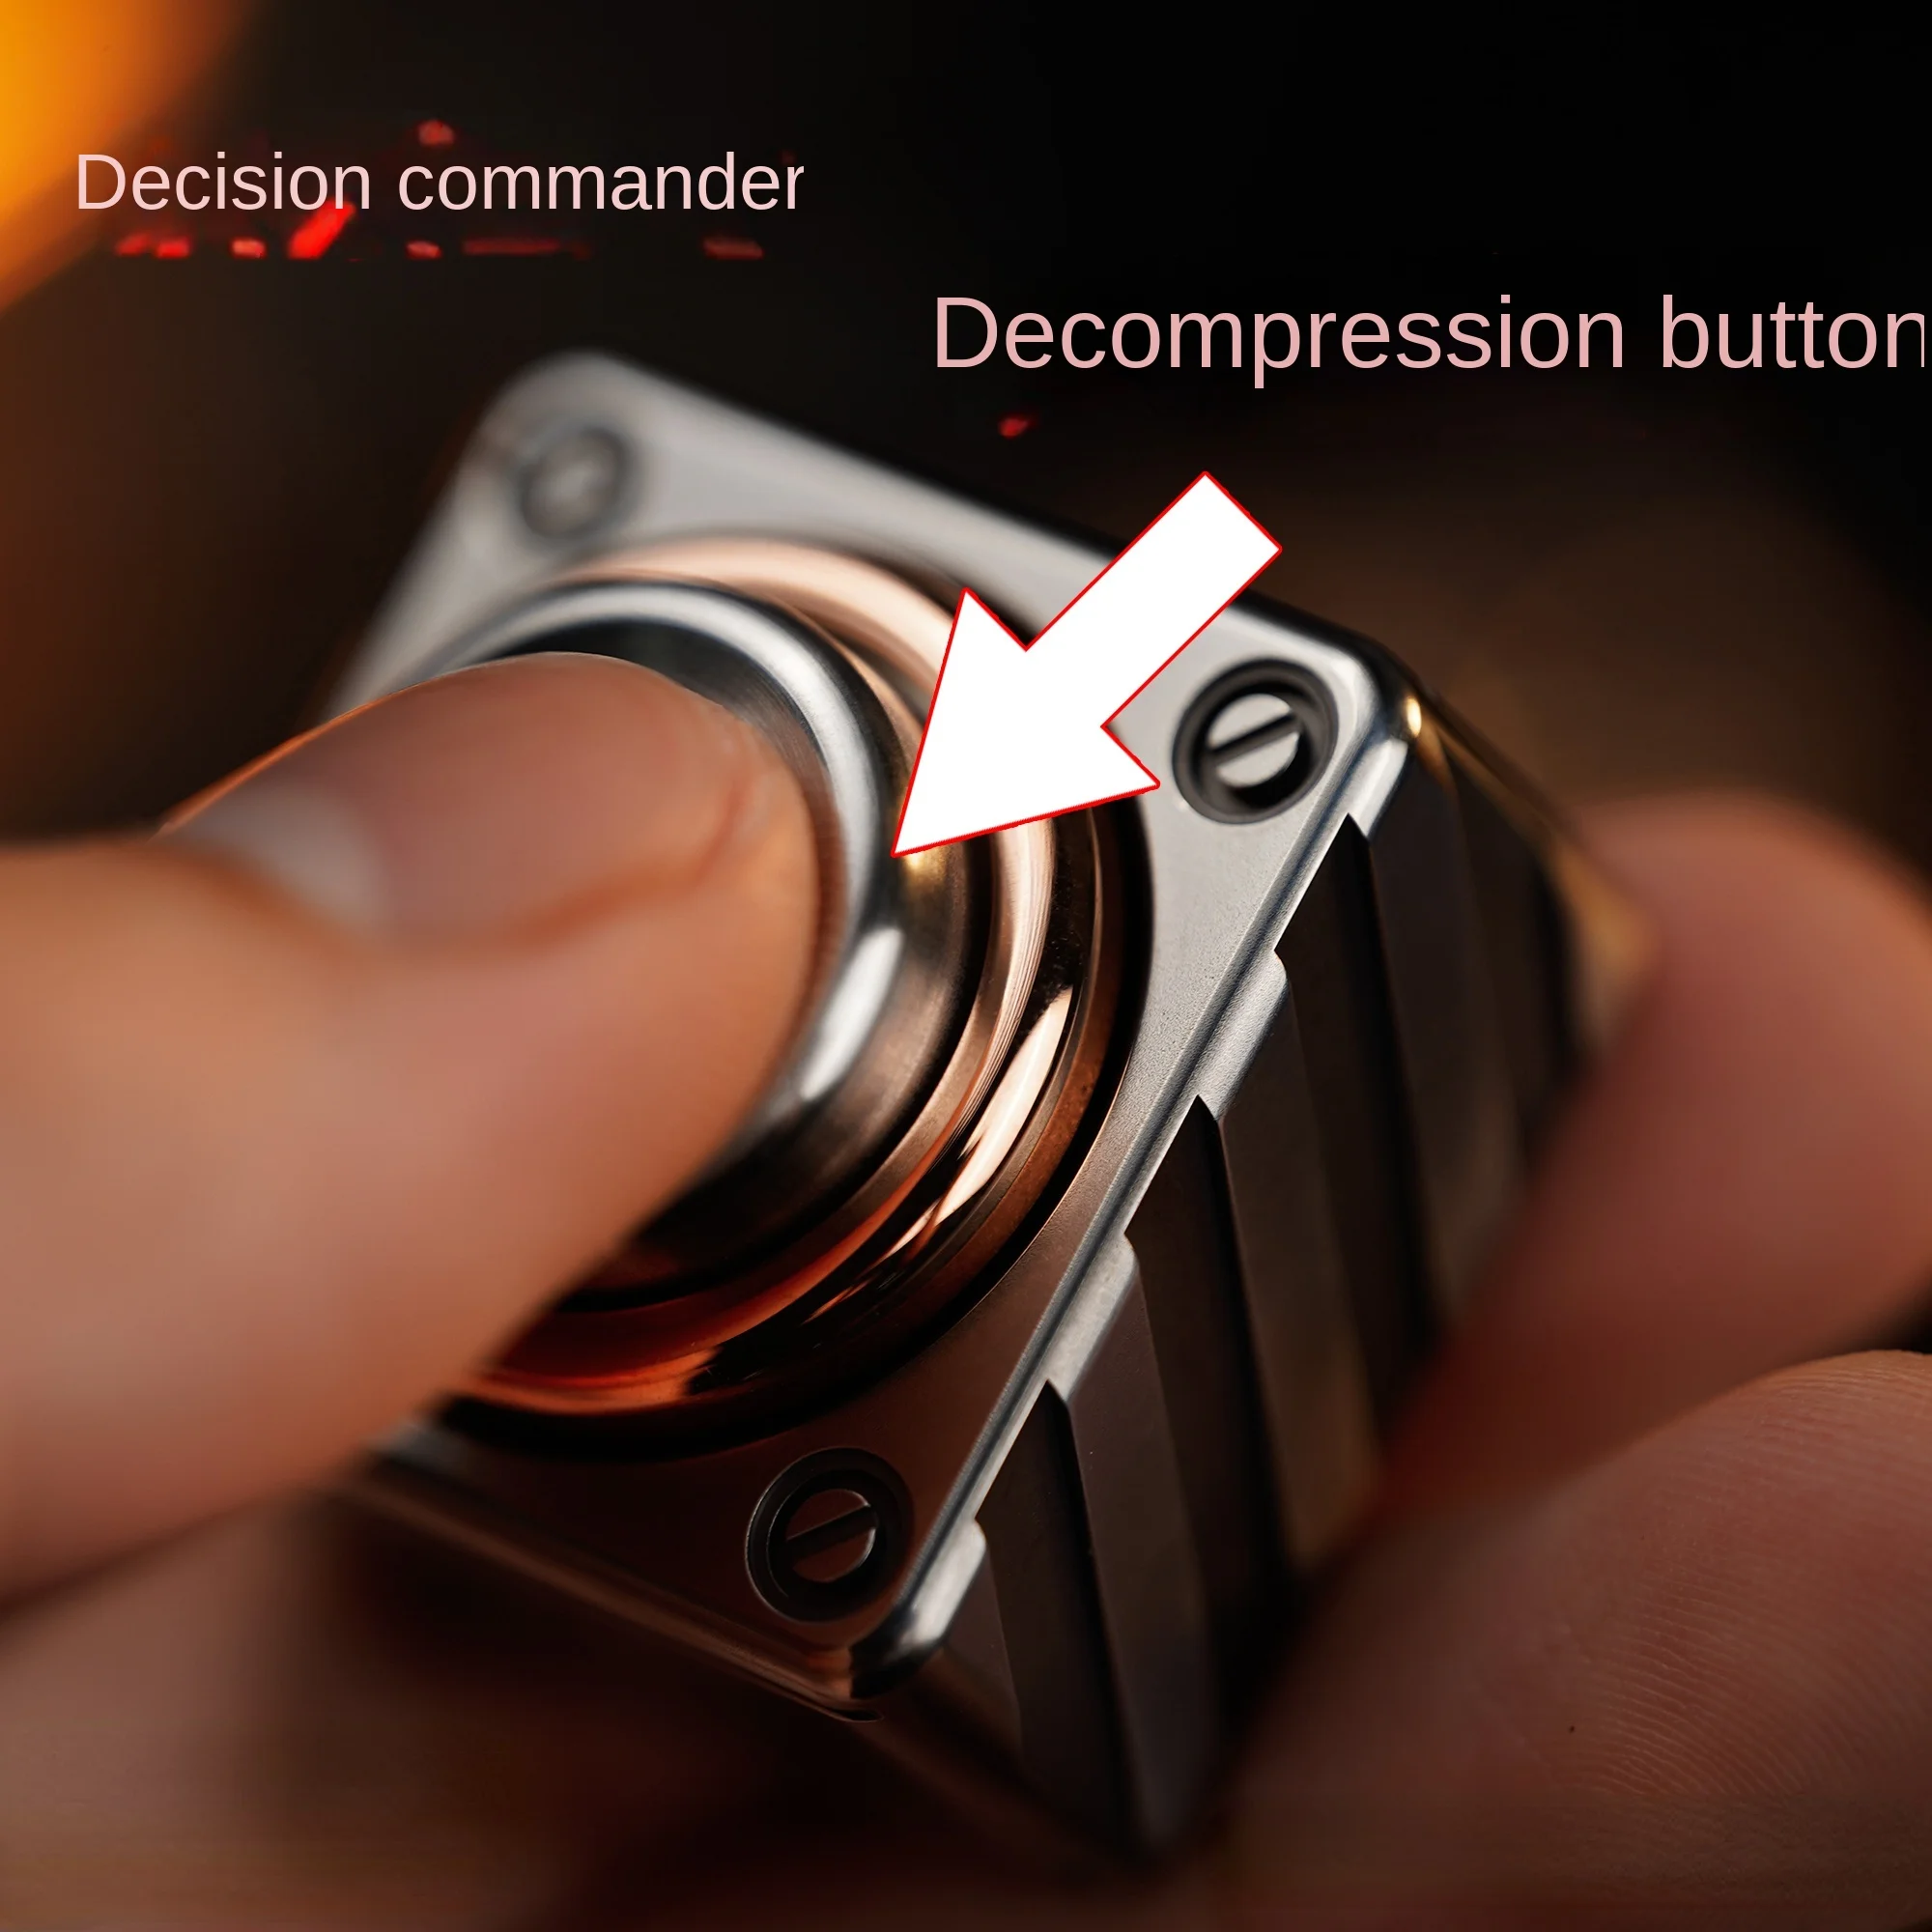 EDC Decision Commander Waste Soil Technology Combination Button Fingertip Gyro Metal Toy Decompression Artifact enlarge